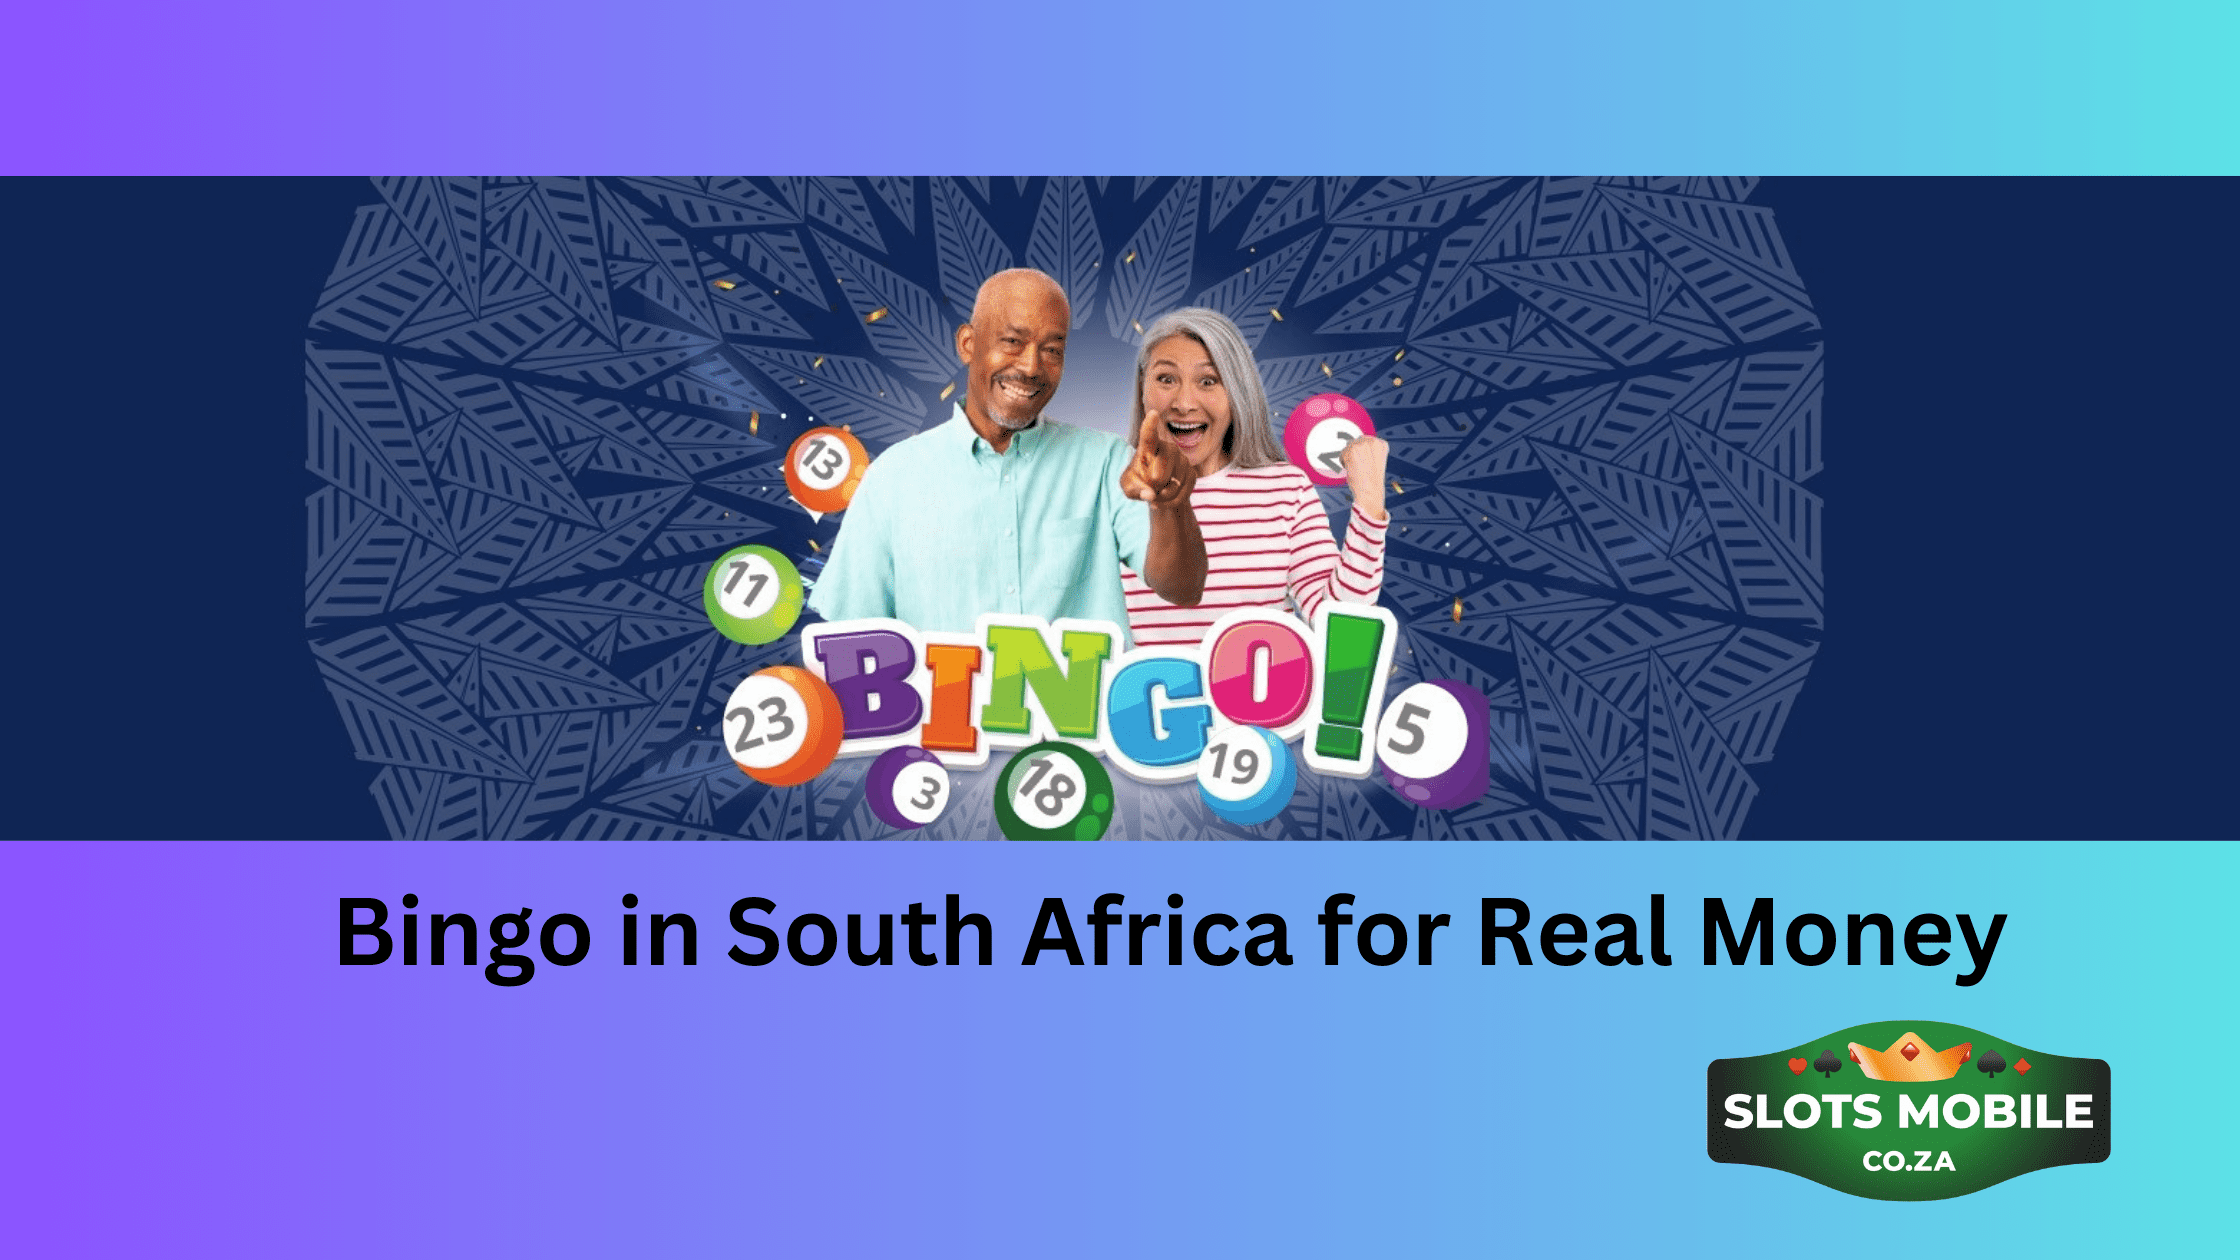 Bingo in South Africa for Real Money